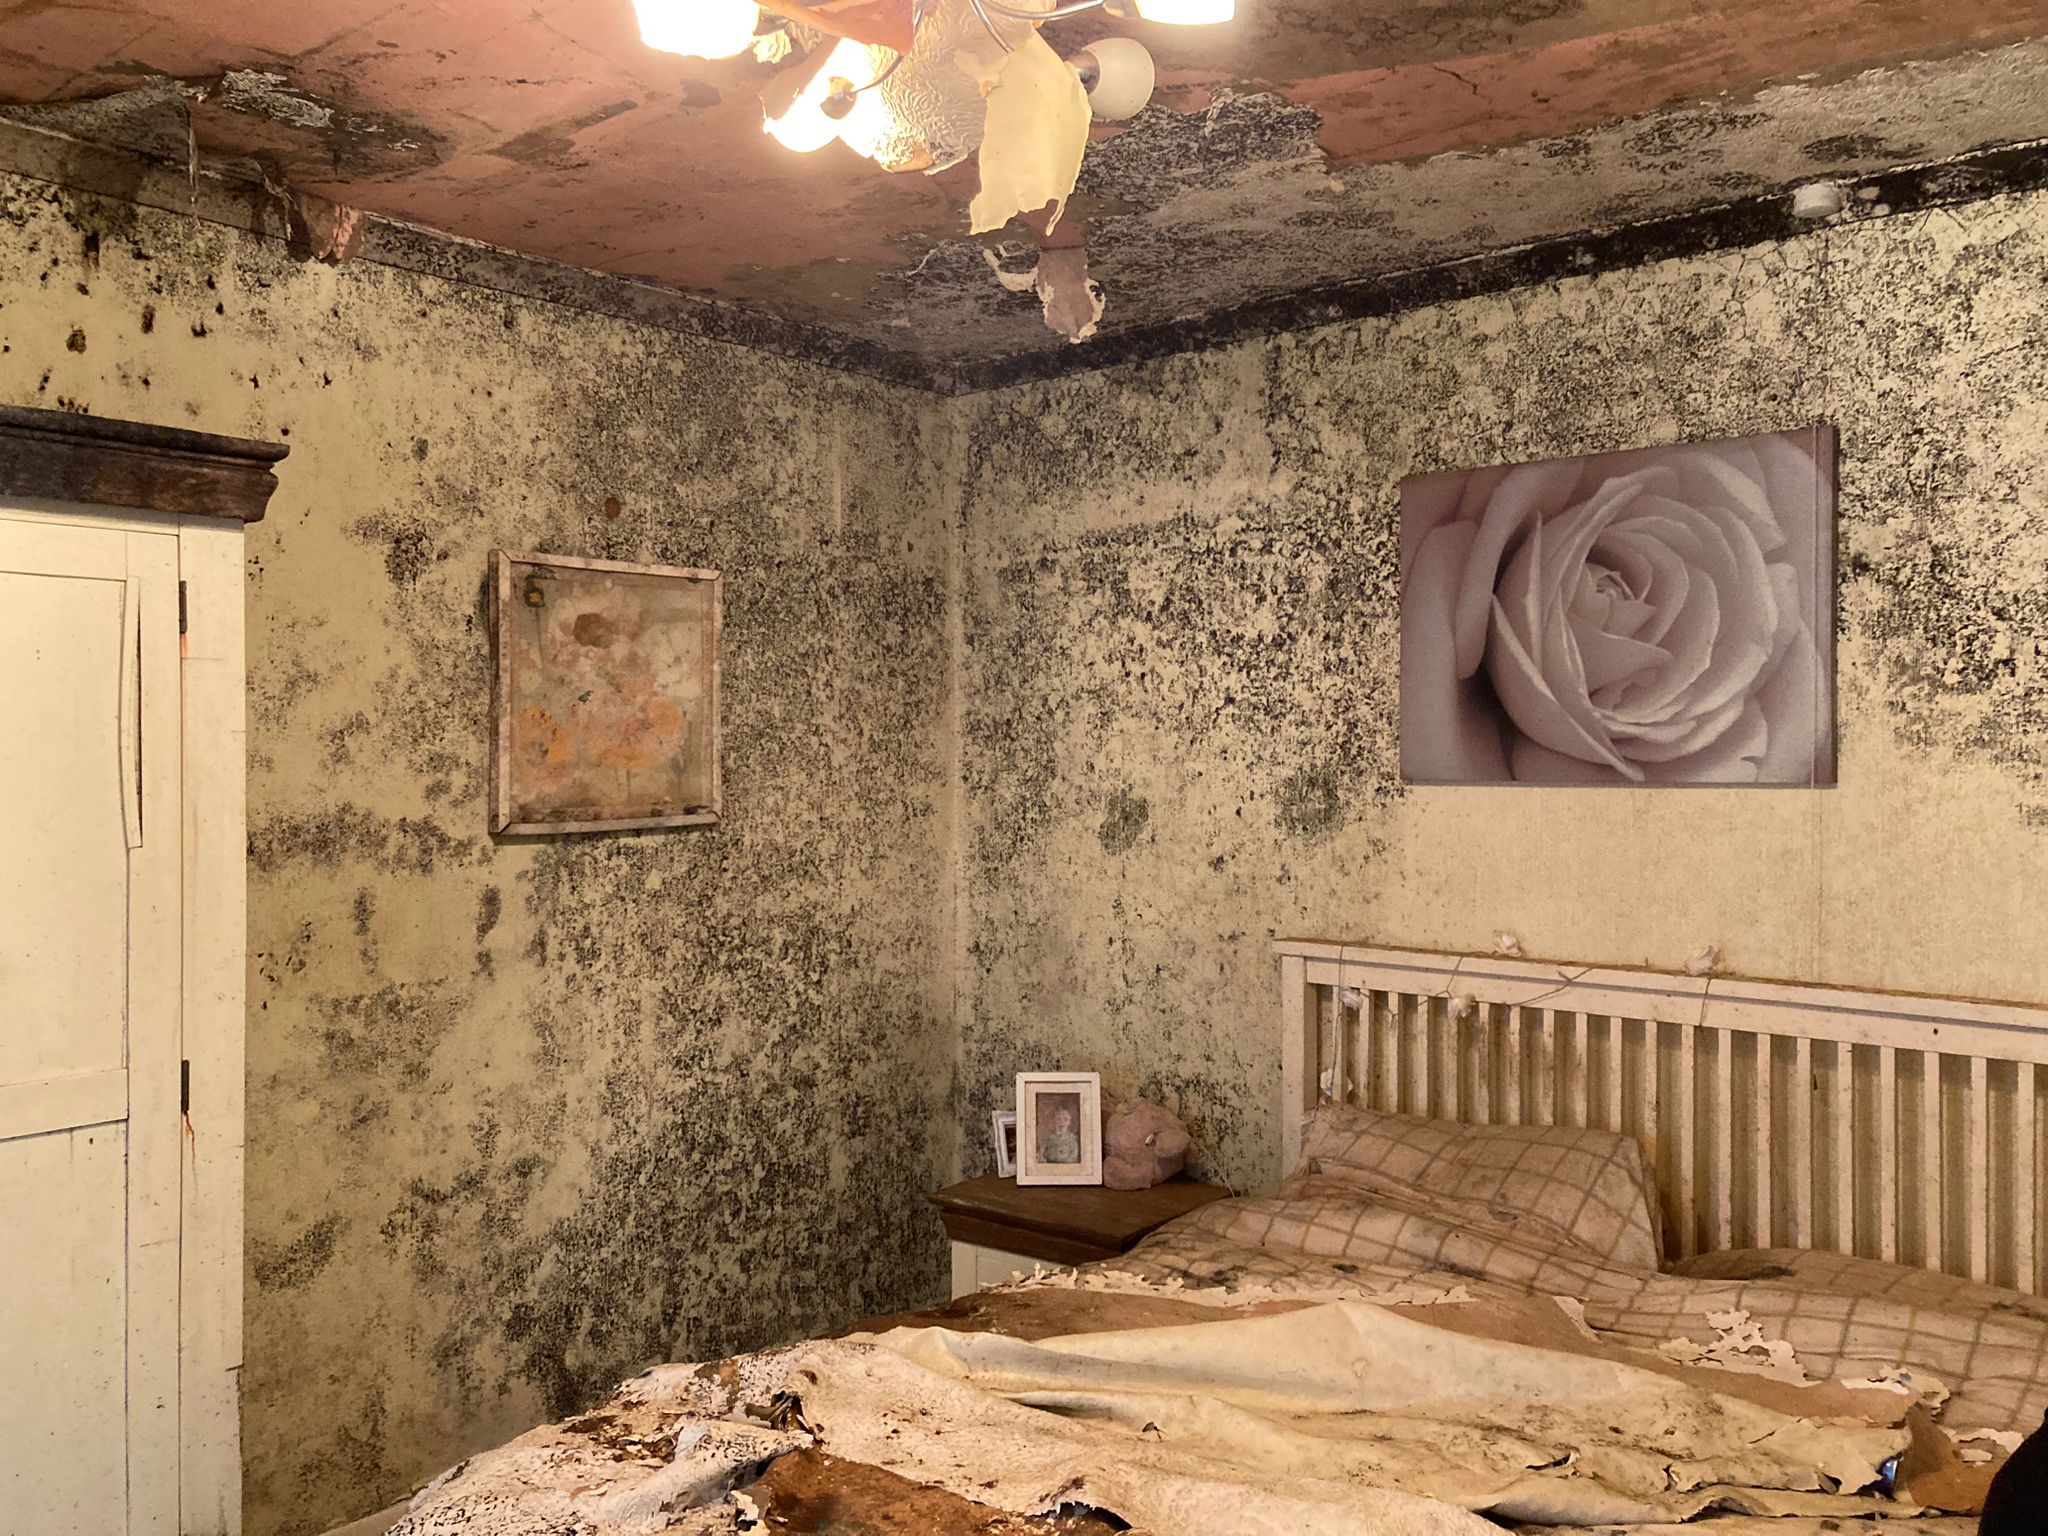 The elderly woman’s bedroom covered in deadly mould